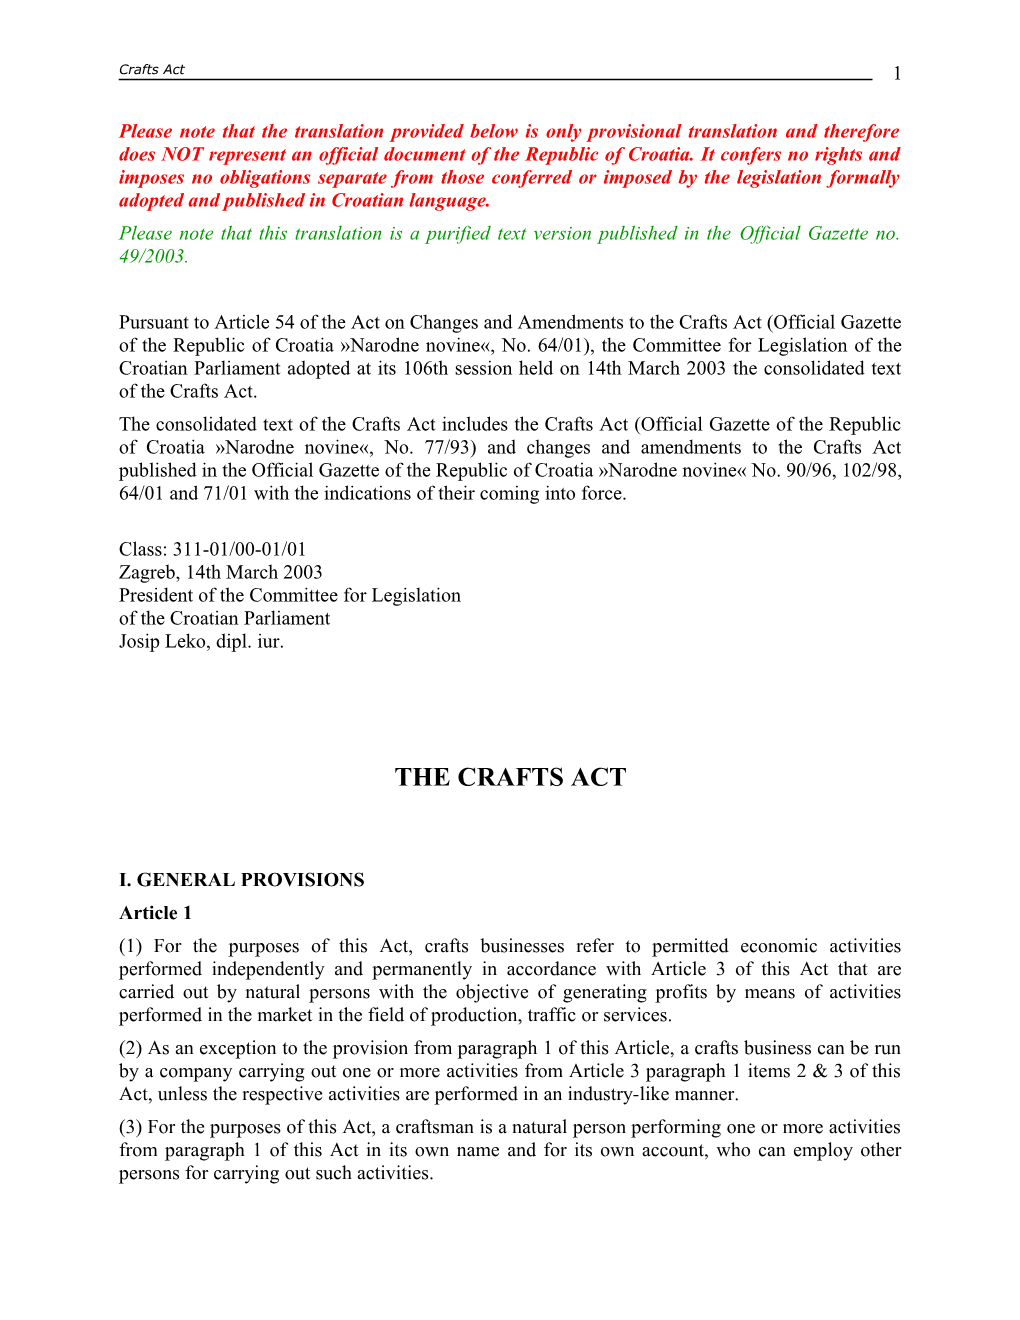 Pursuant to Article 54 of the Act on Changes and Amendments to the Crafts Act (Official